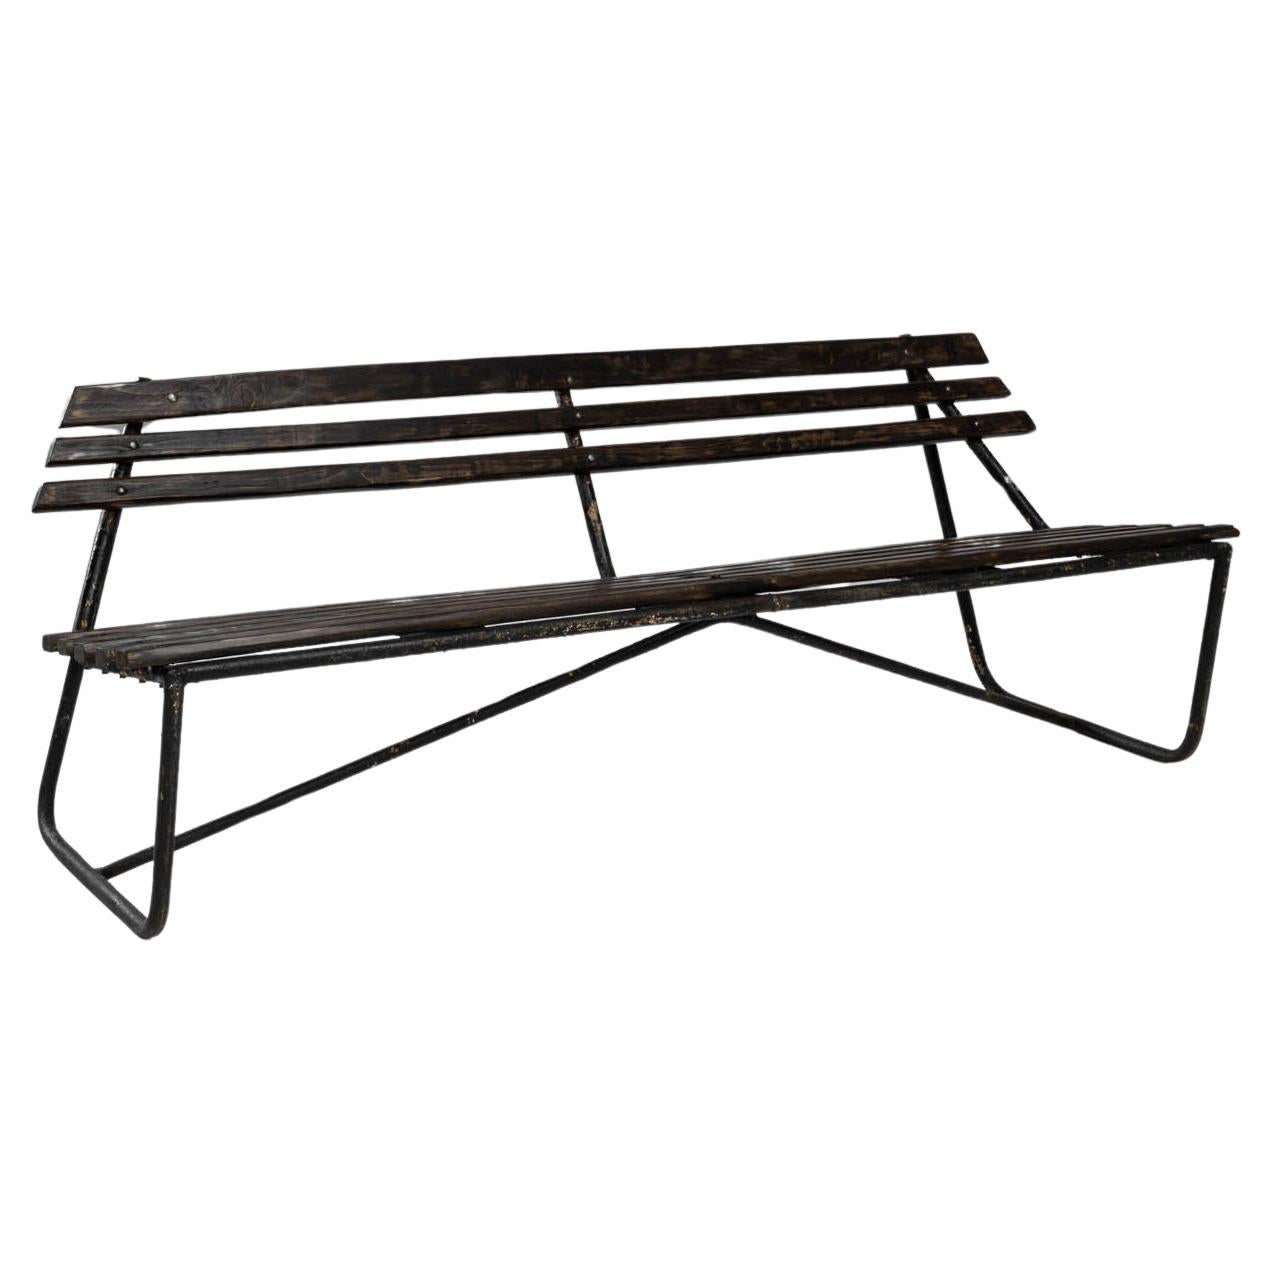 20th Century French Metal & Wooden Bench